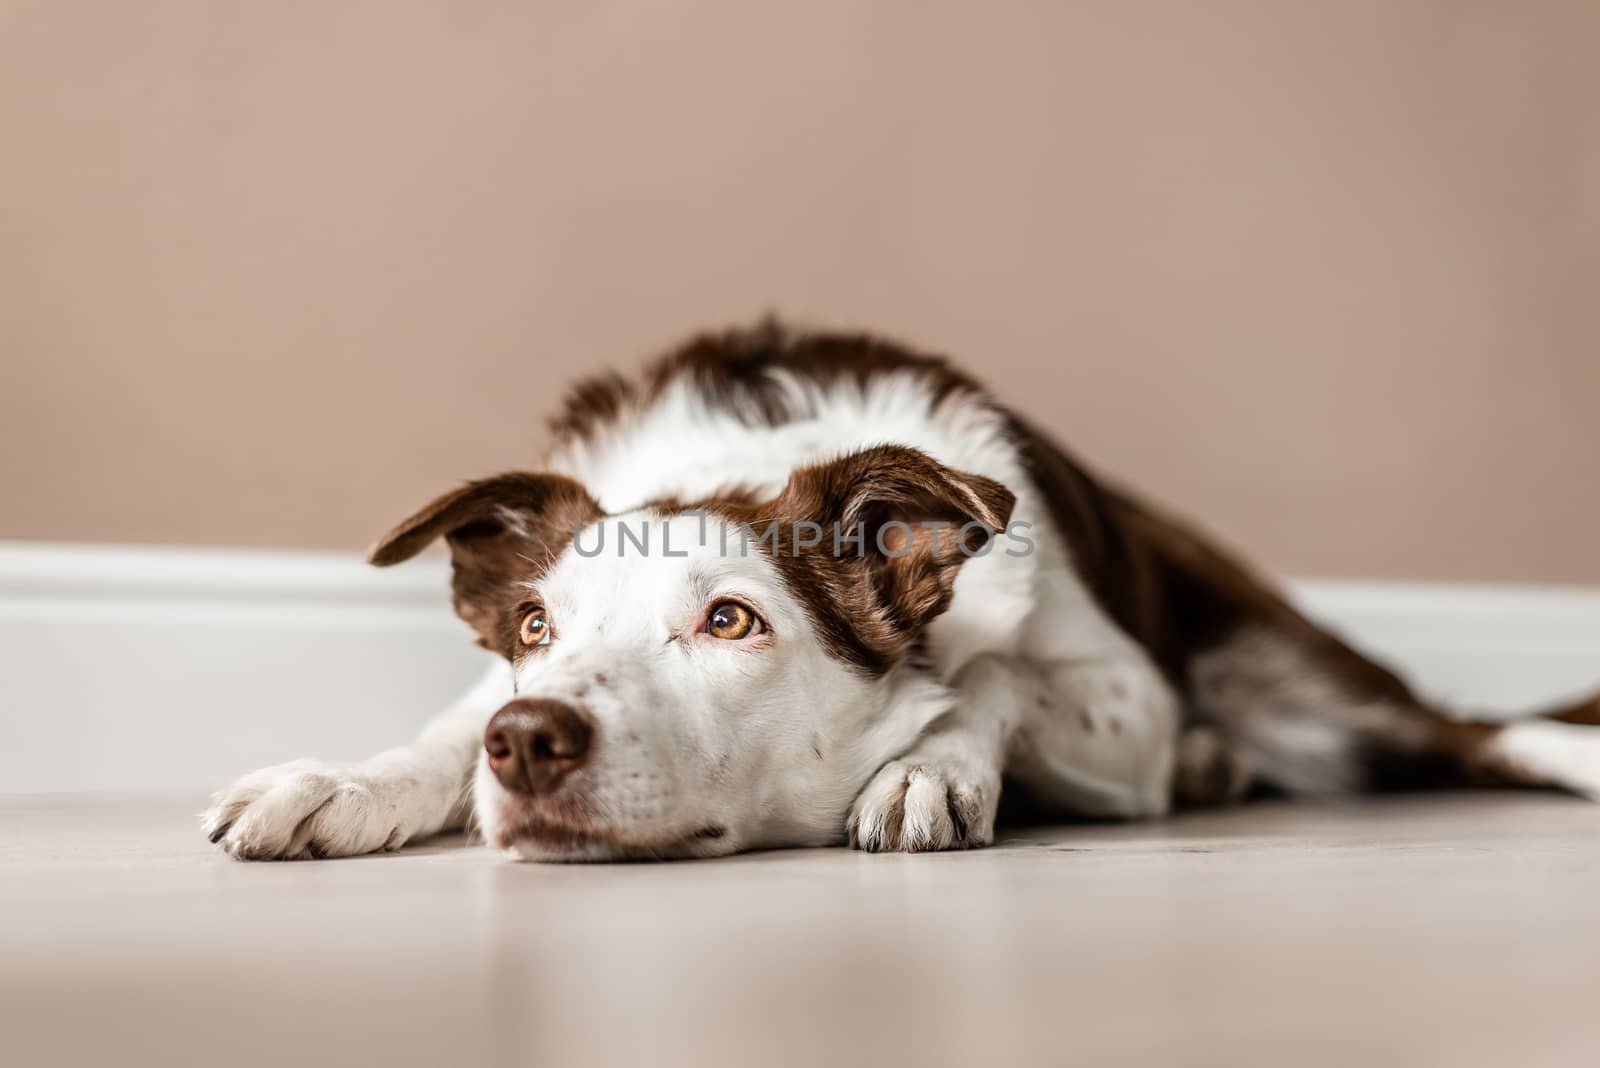 Cute brown and white Border Collie lays on the floor inside a house, looking up and away from the camera. Lazy day, calm dog